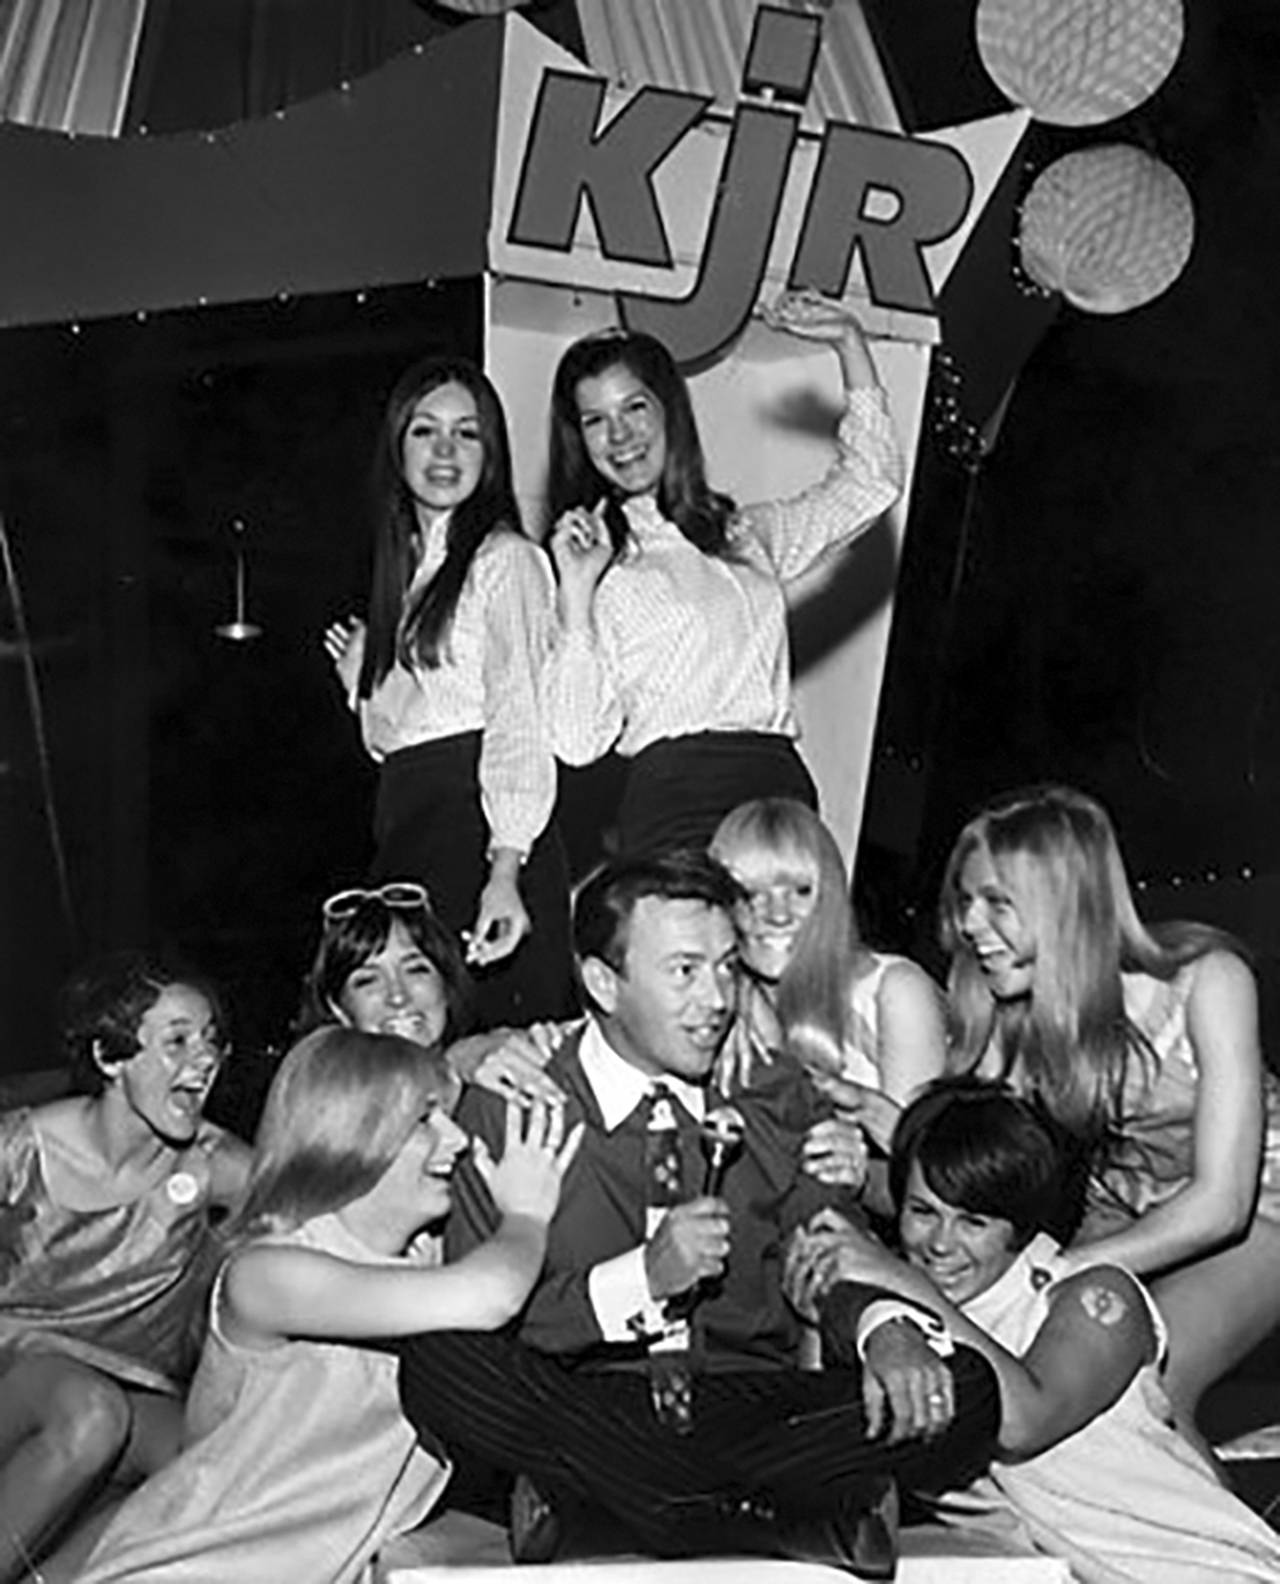 (Pat O’Day Collection) Pat O’Day surrounded by admirers at a dance party in the 1960s.